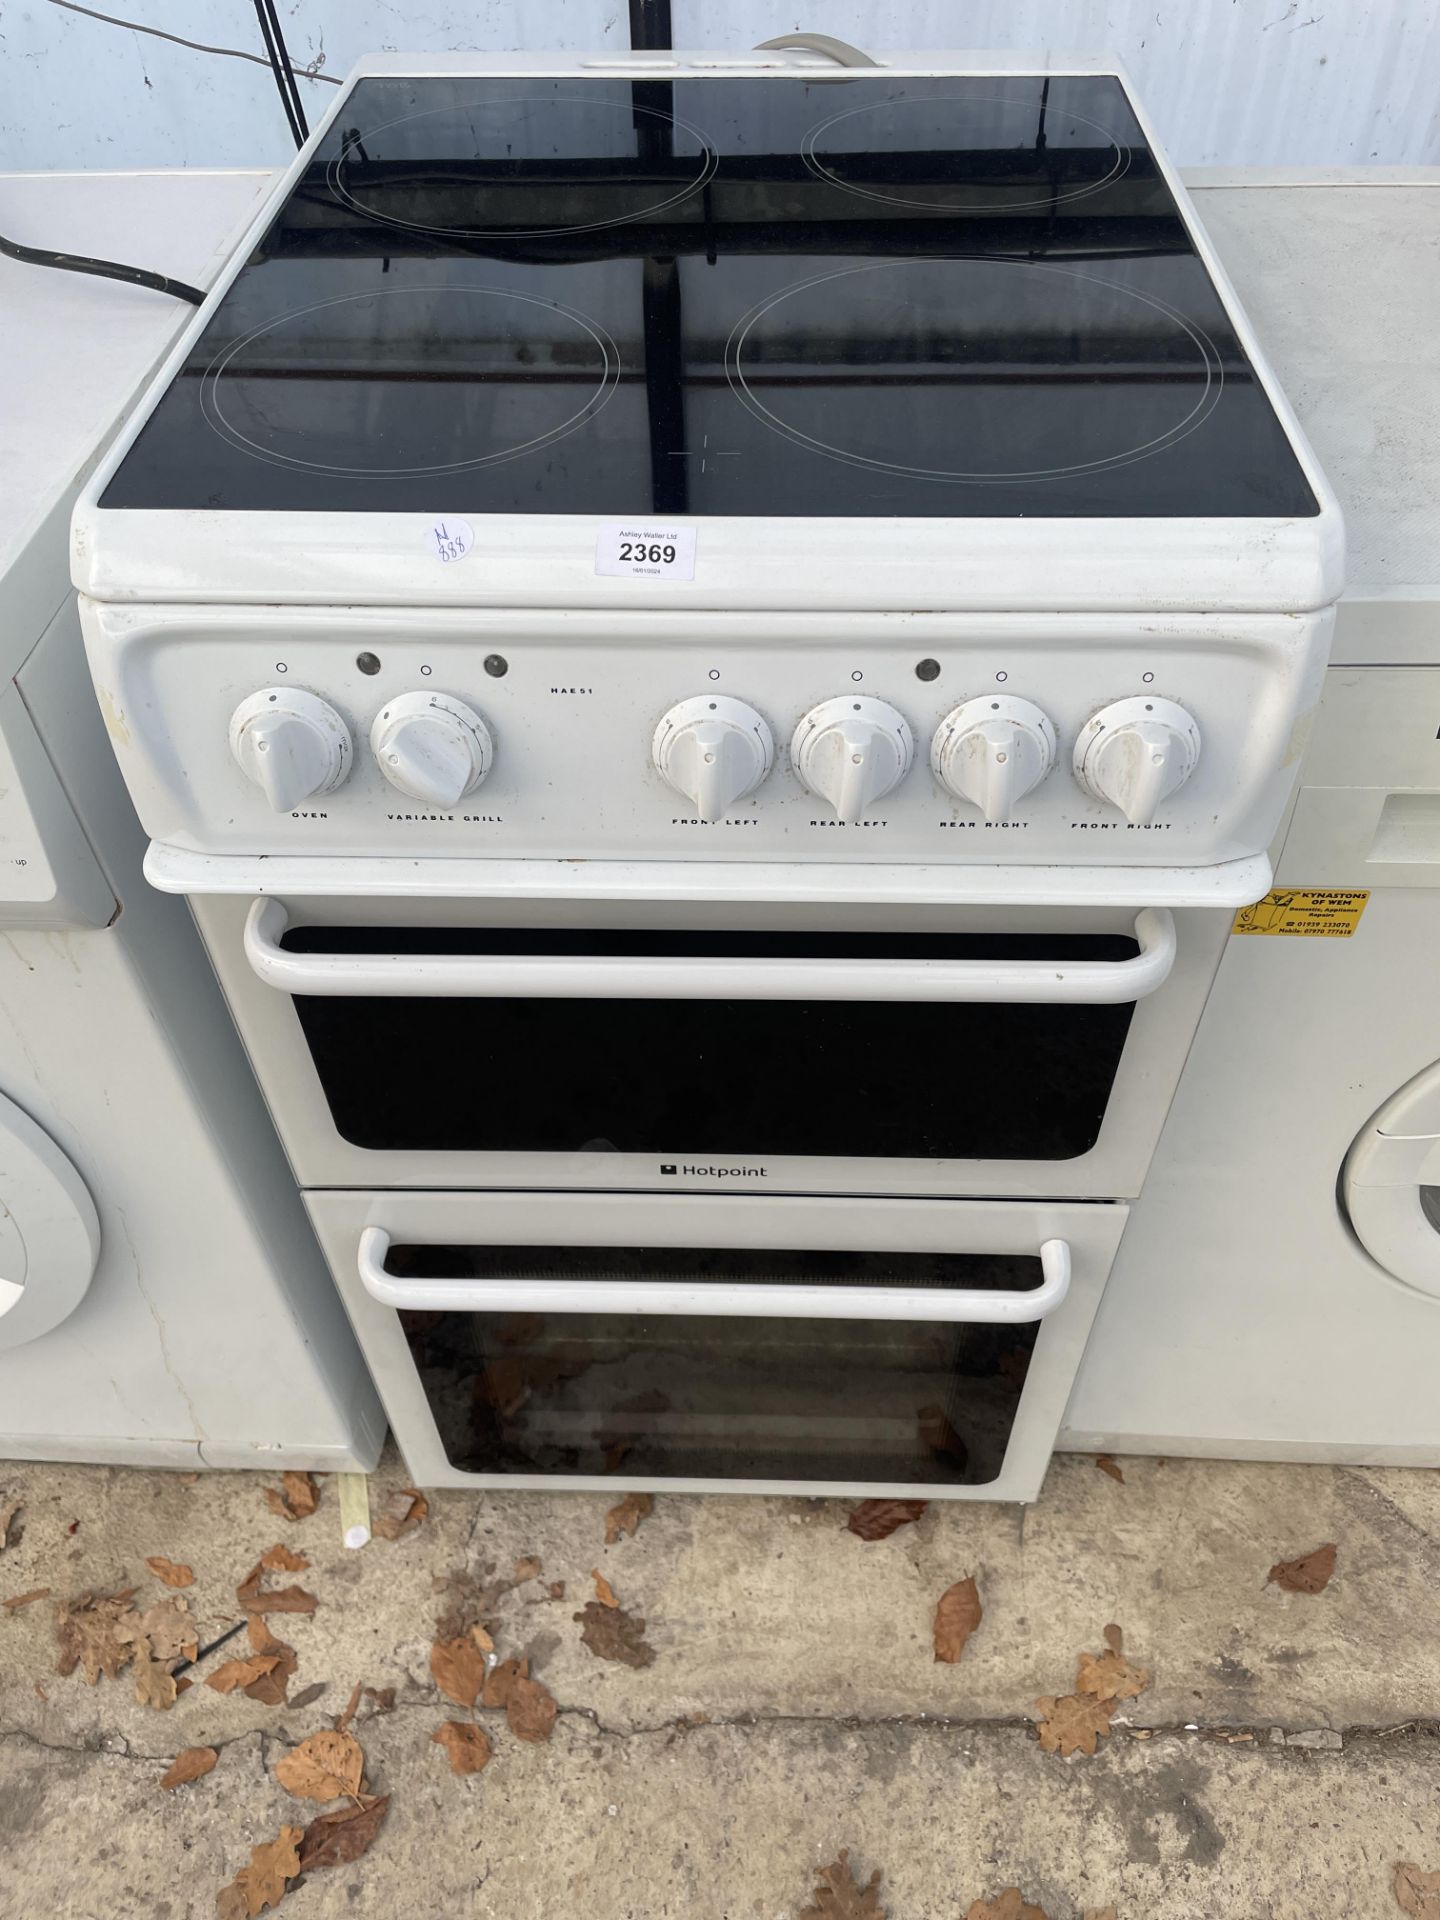 A BLACK AND WHITE HOTPOINT ELECTRIC FREESTANDING OVEN AND HOB